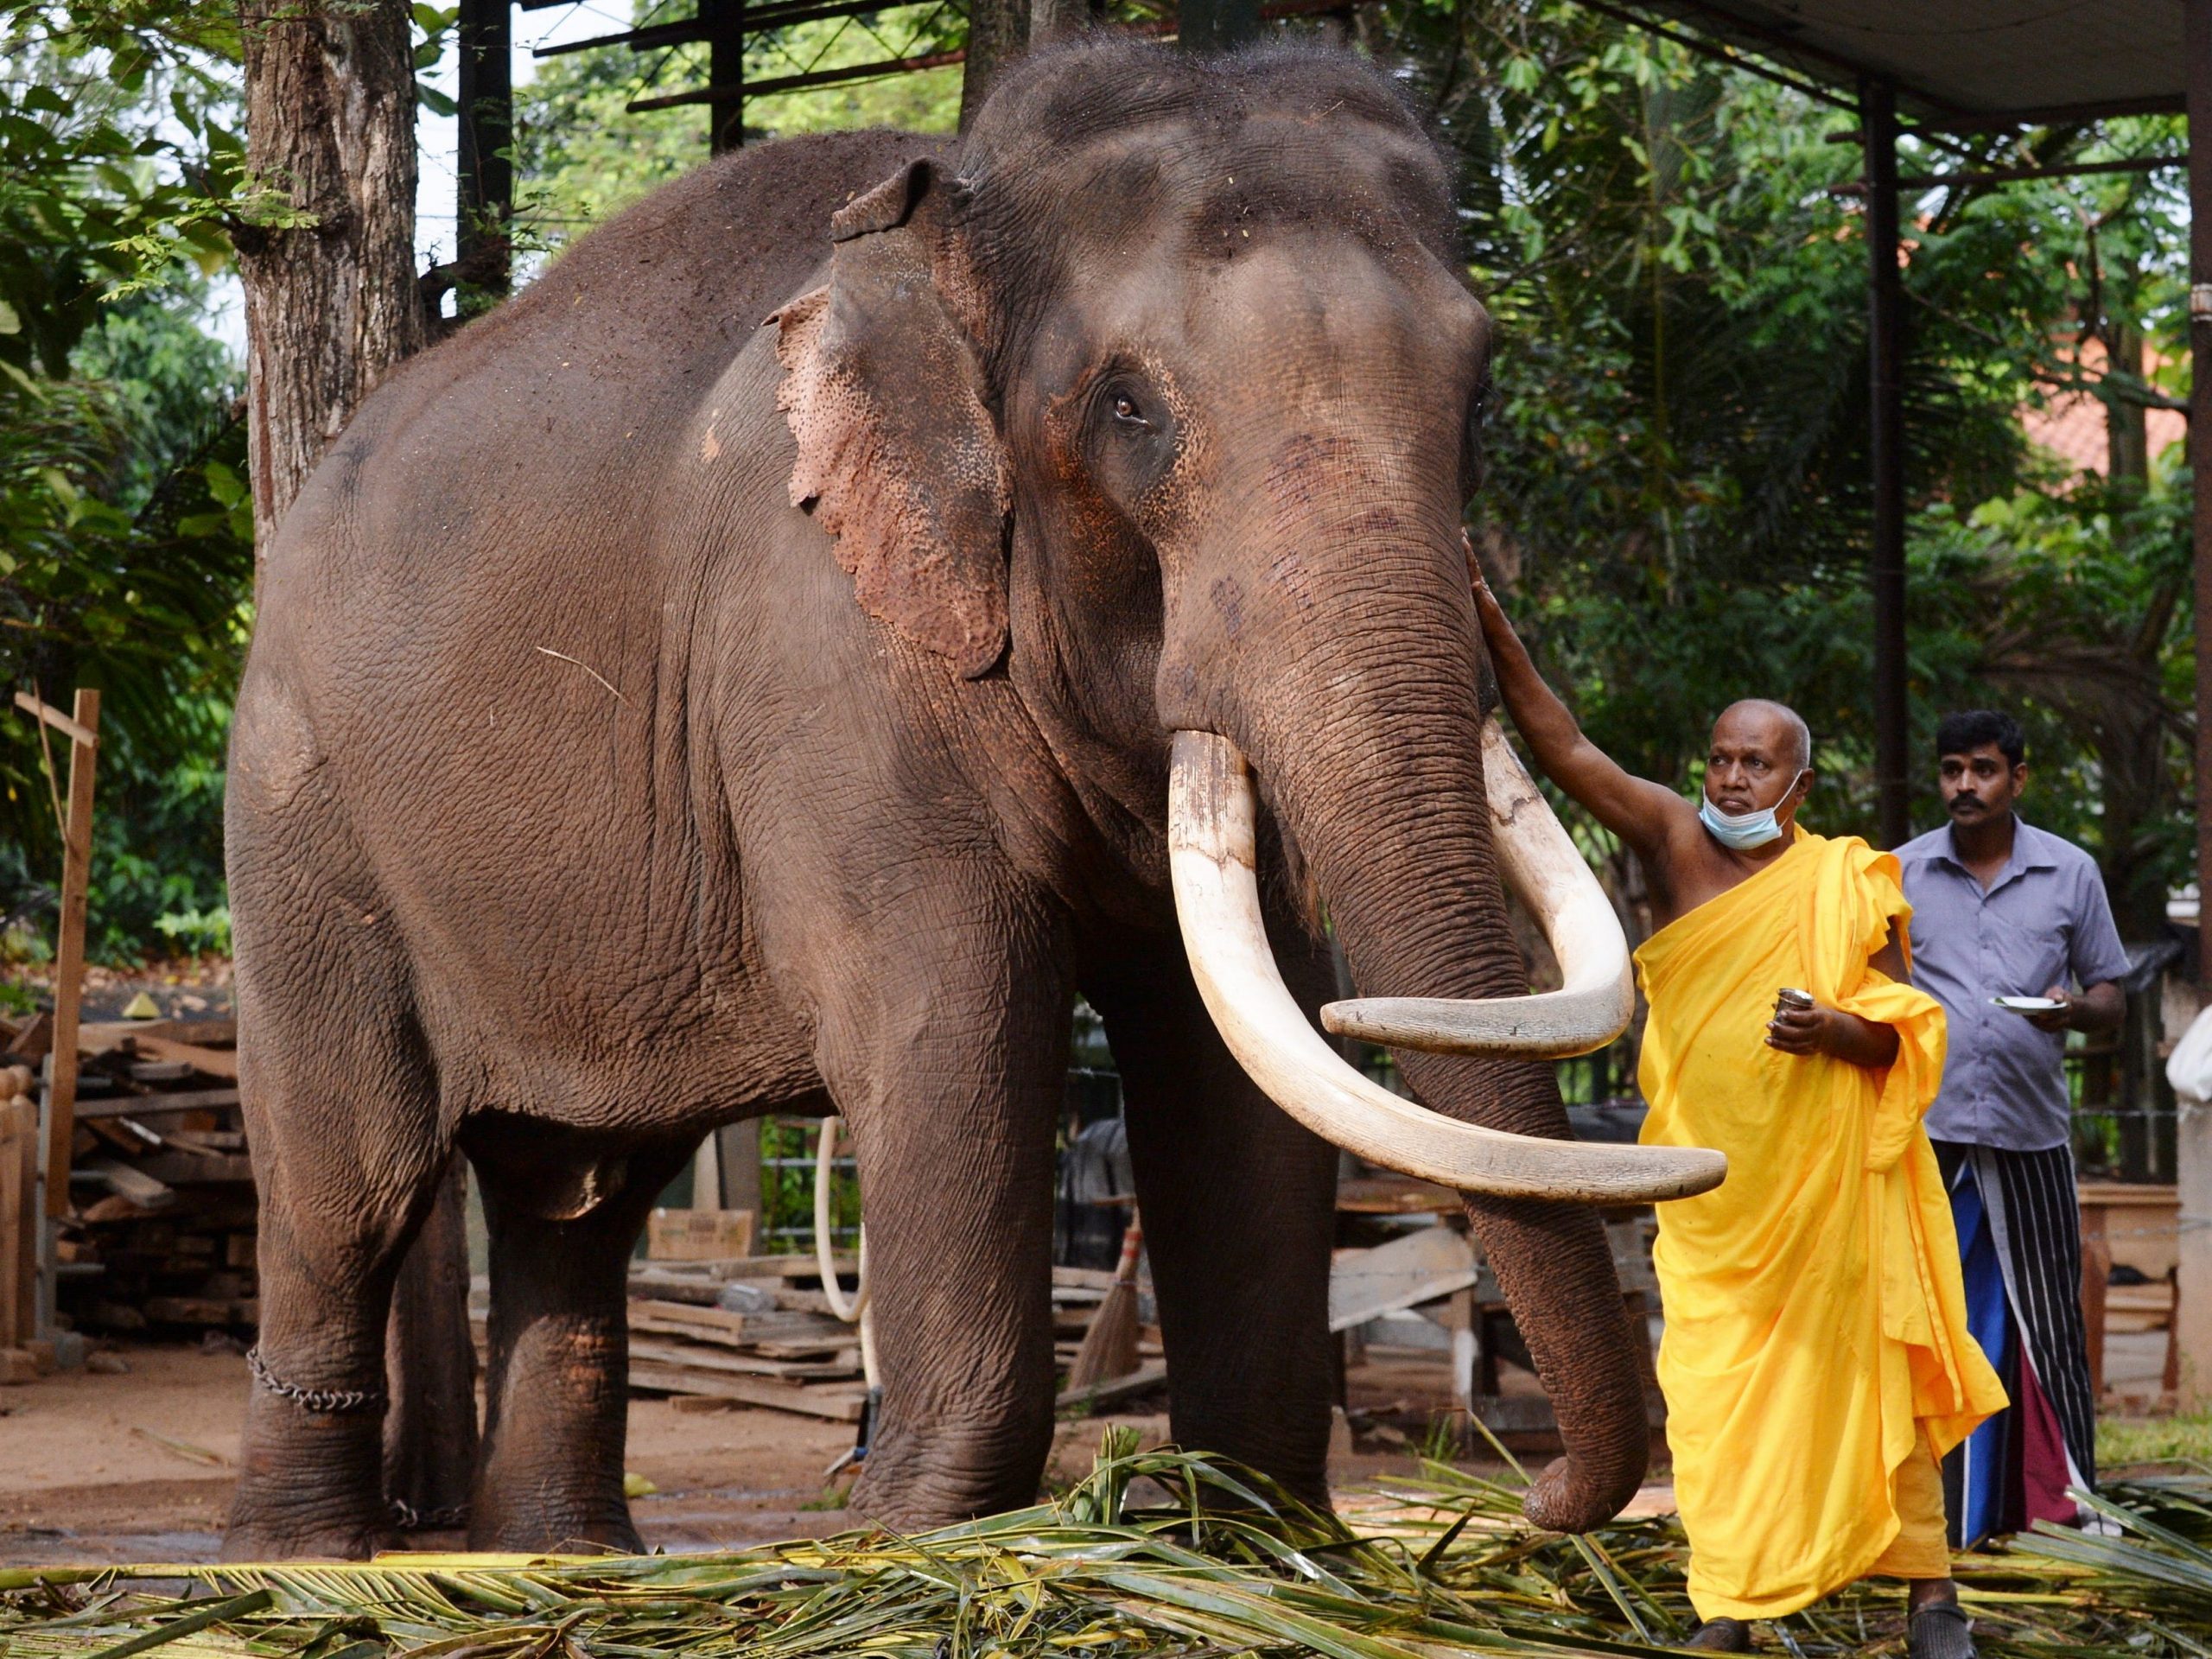 A Sri Lankan Bhuddhist monk anoints a temple elephant as a part ritual marking the New Year as per traditions at a temple in Colombo on April 17, 2021.